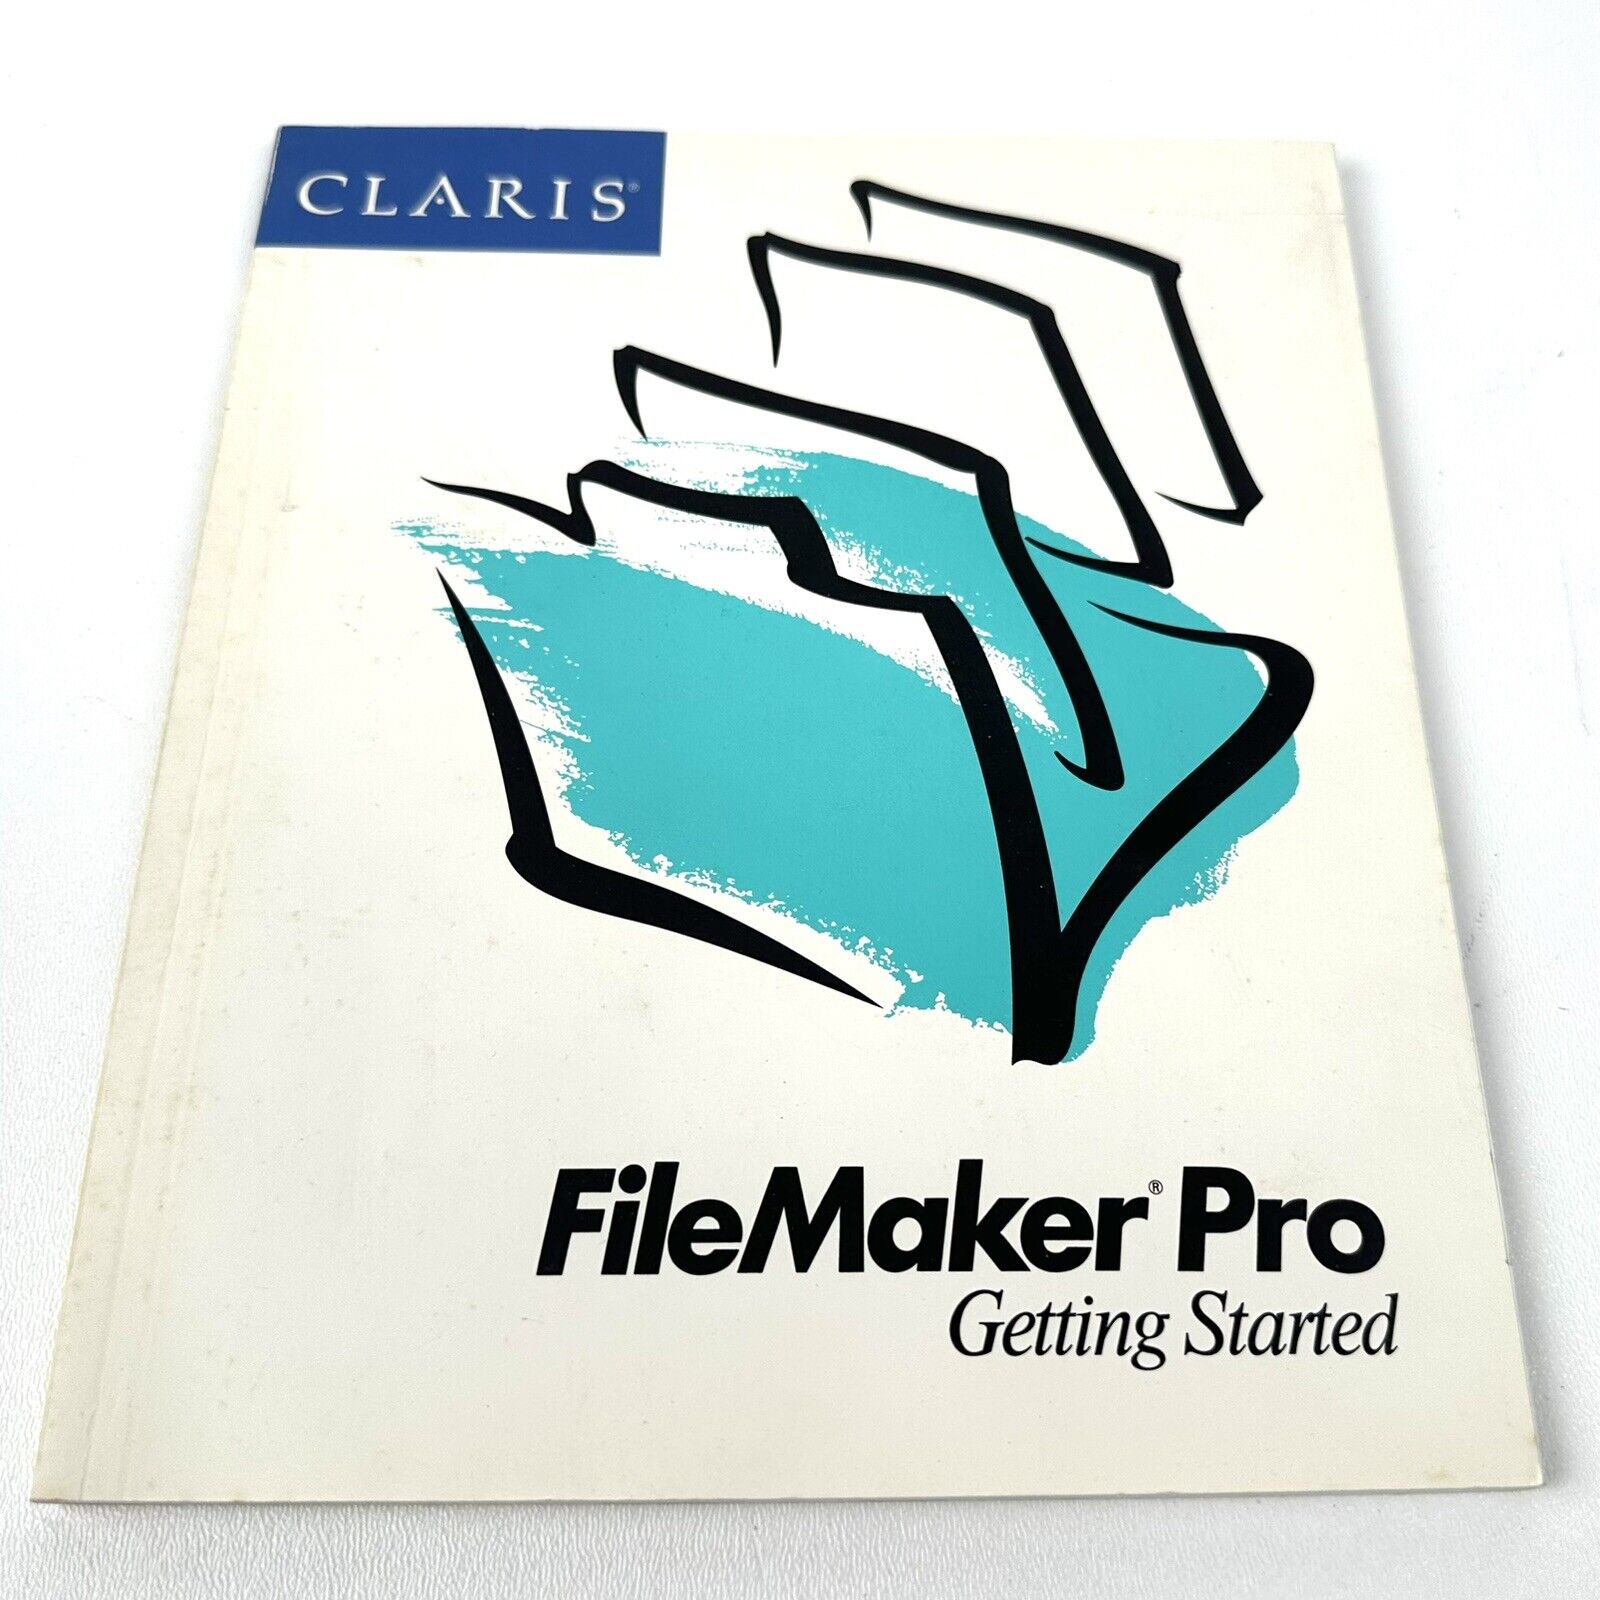 Claris FileMaker Pro Getting Started Guide For Apple Macintosh - Vintage 